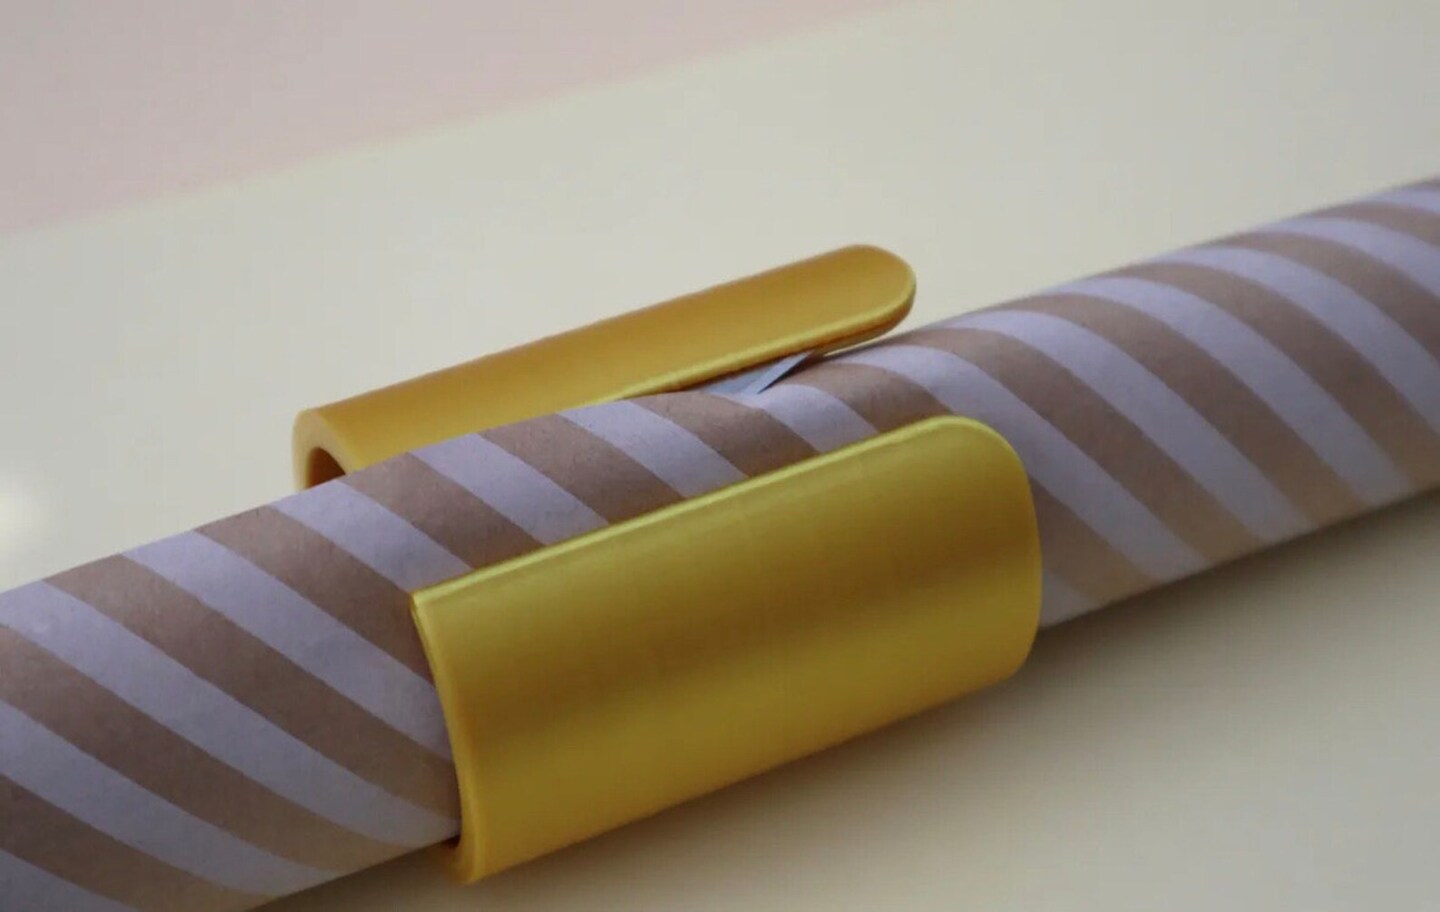 Wrapping Paper Roll Cutter - Clean Cut by YelTrik Designs - MakerWorld